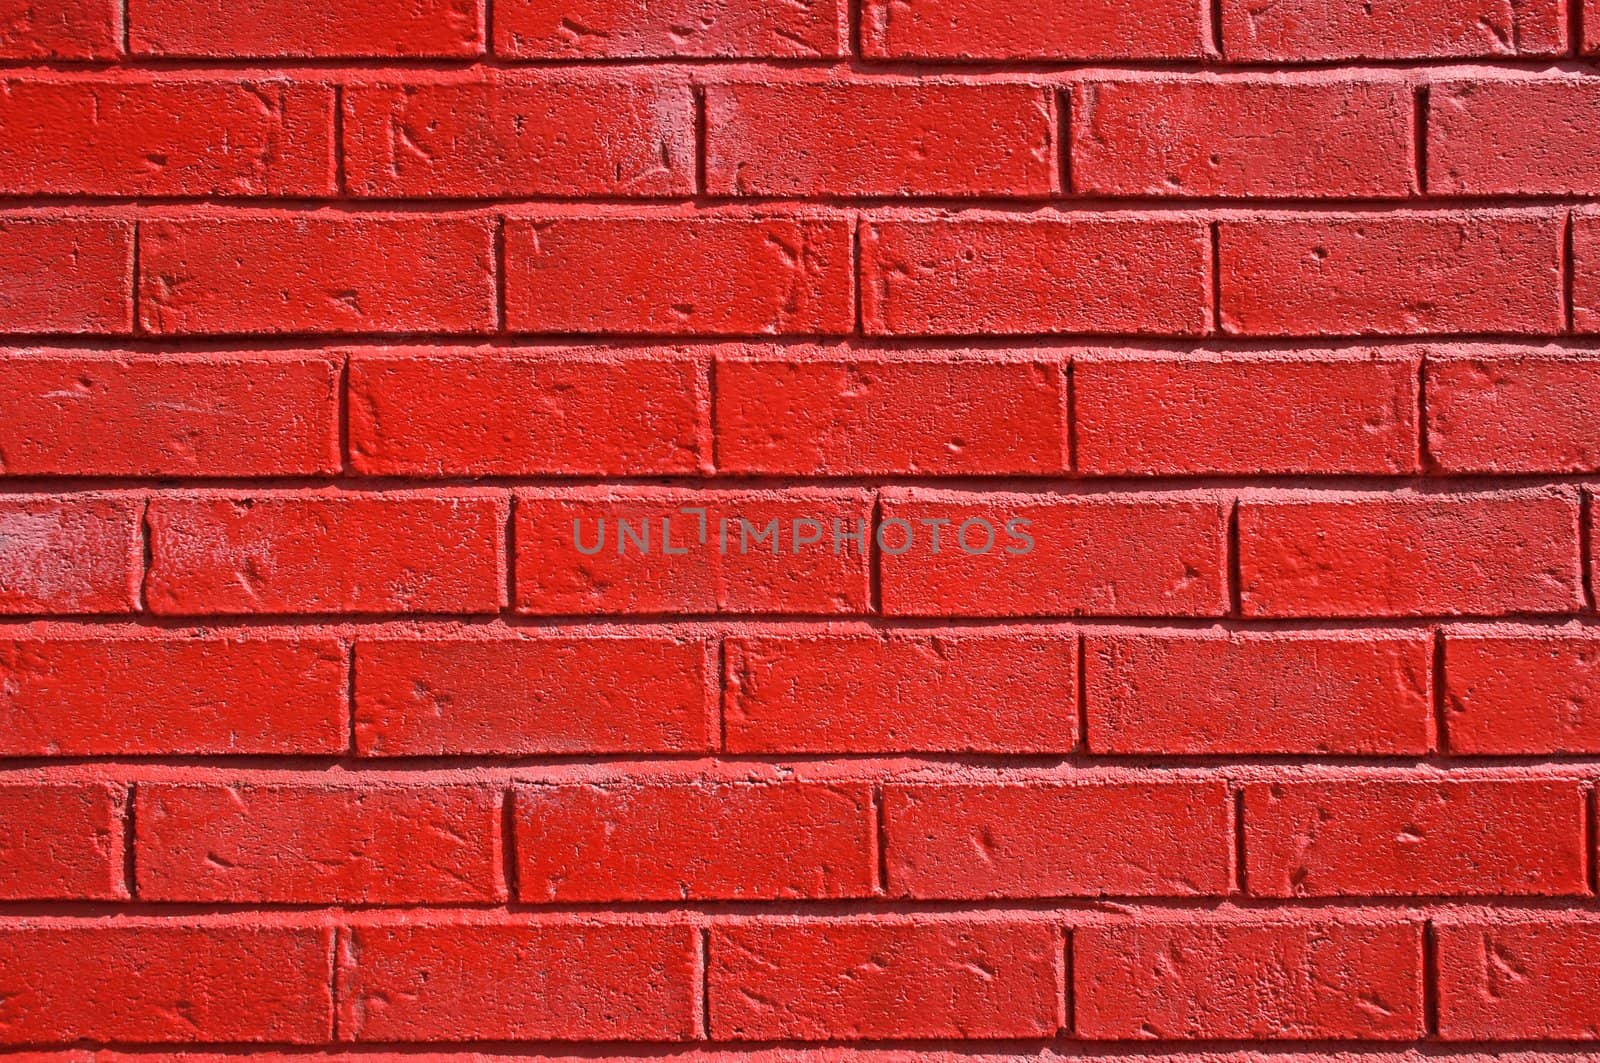 Red painted brick wall background.